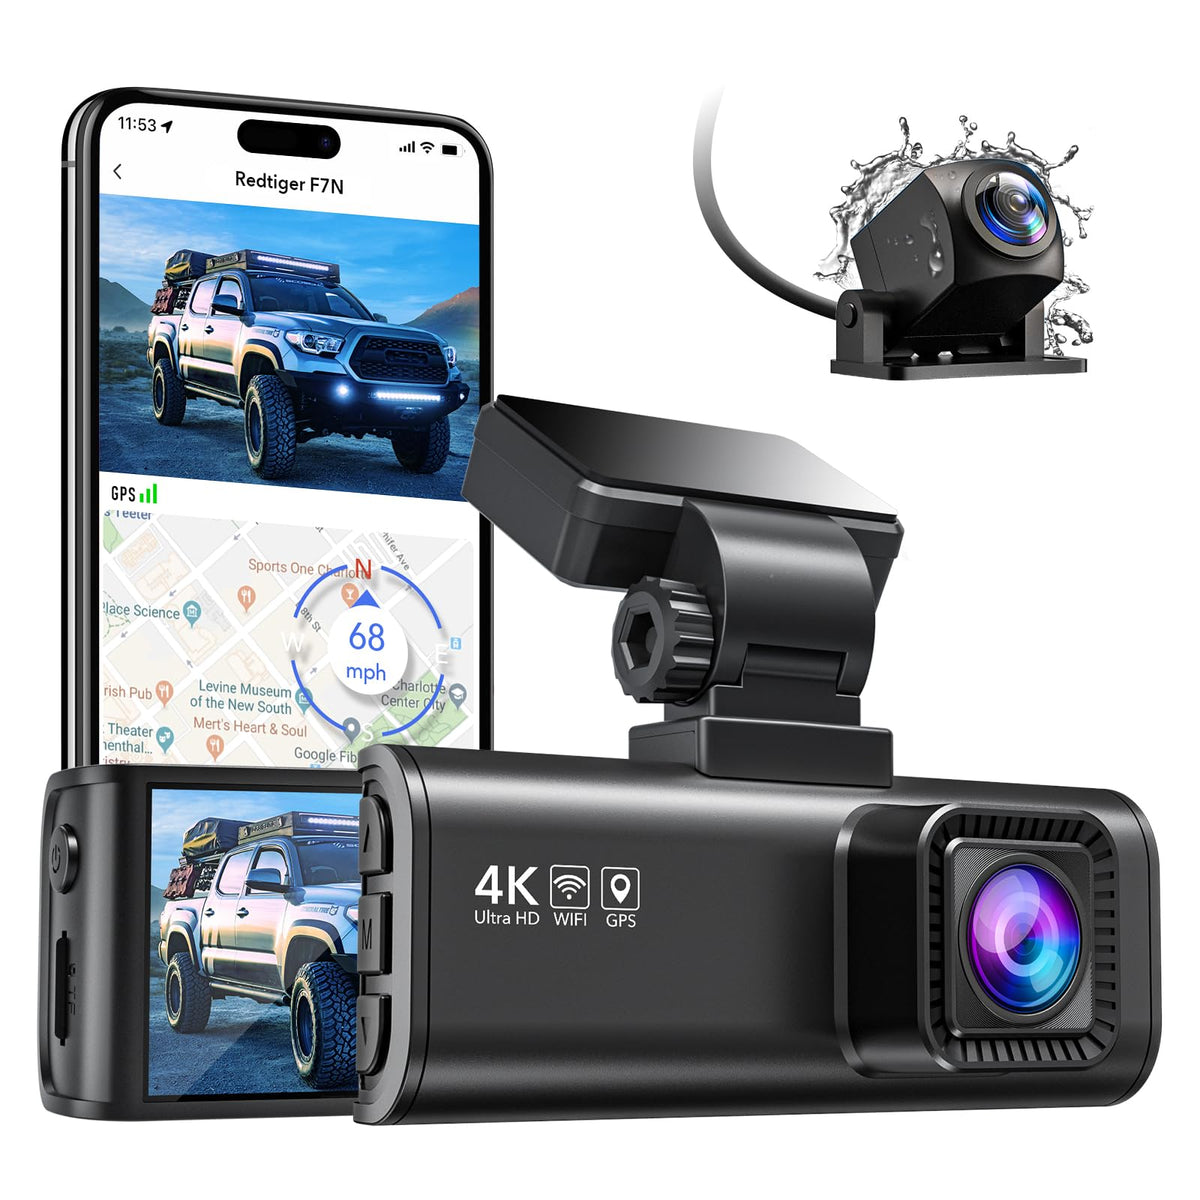 Dual Dash Cam Front And Inside 1080p Dash Camera For Cars - Temu